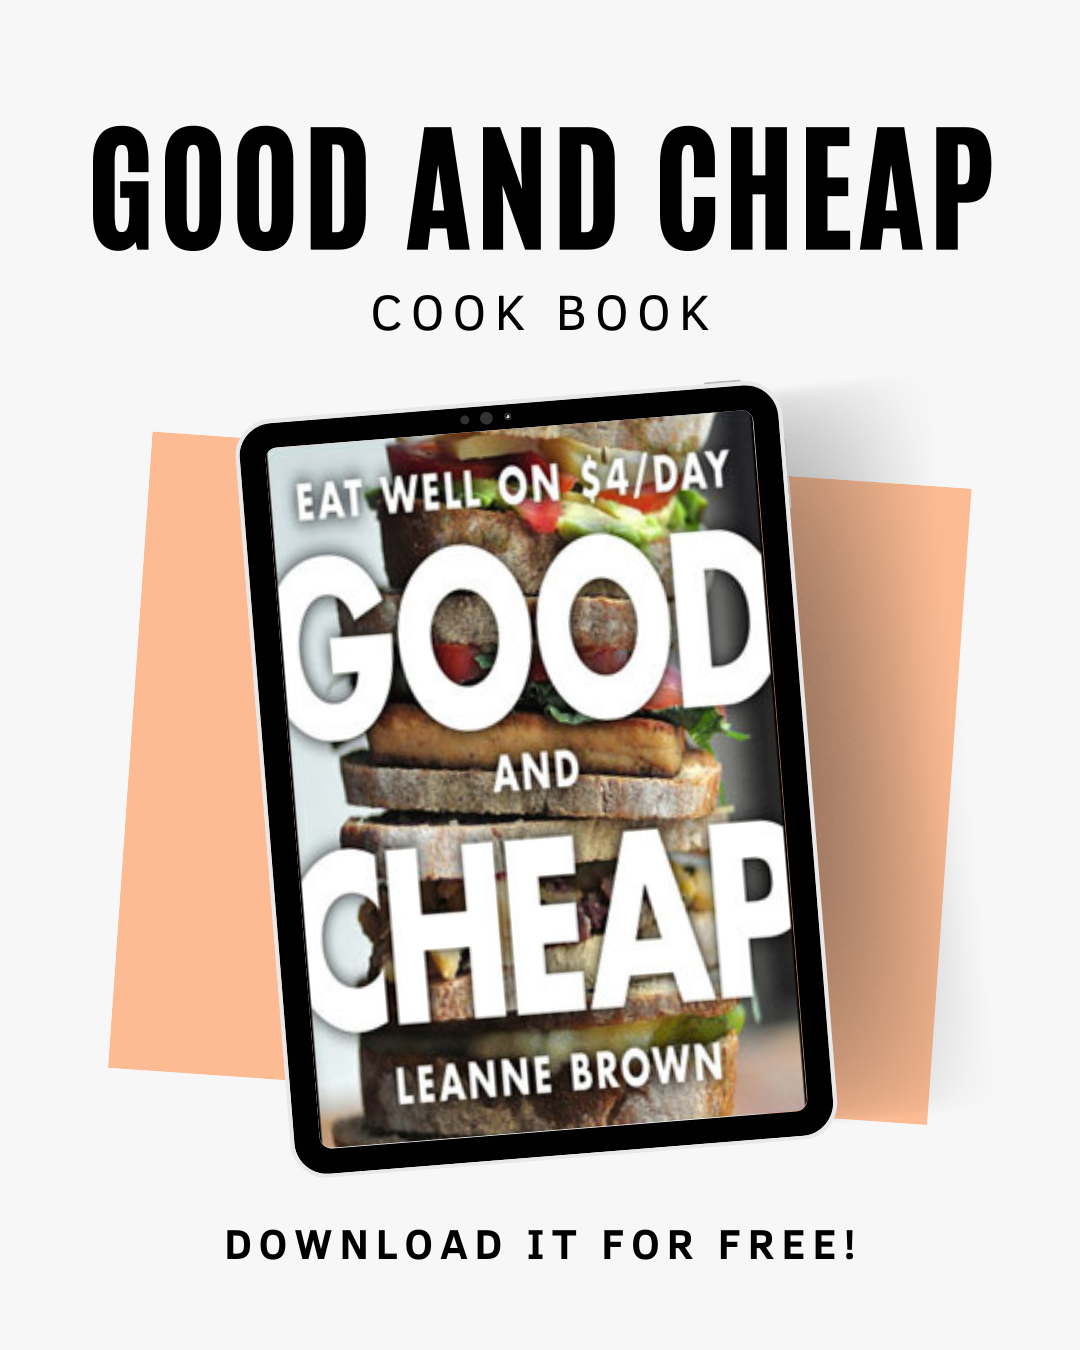 Discounted cookbook recommendations